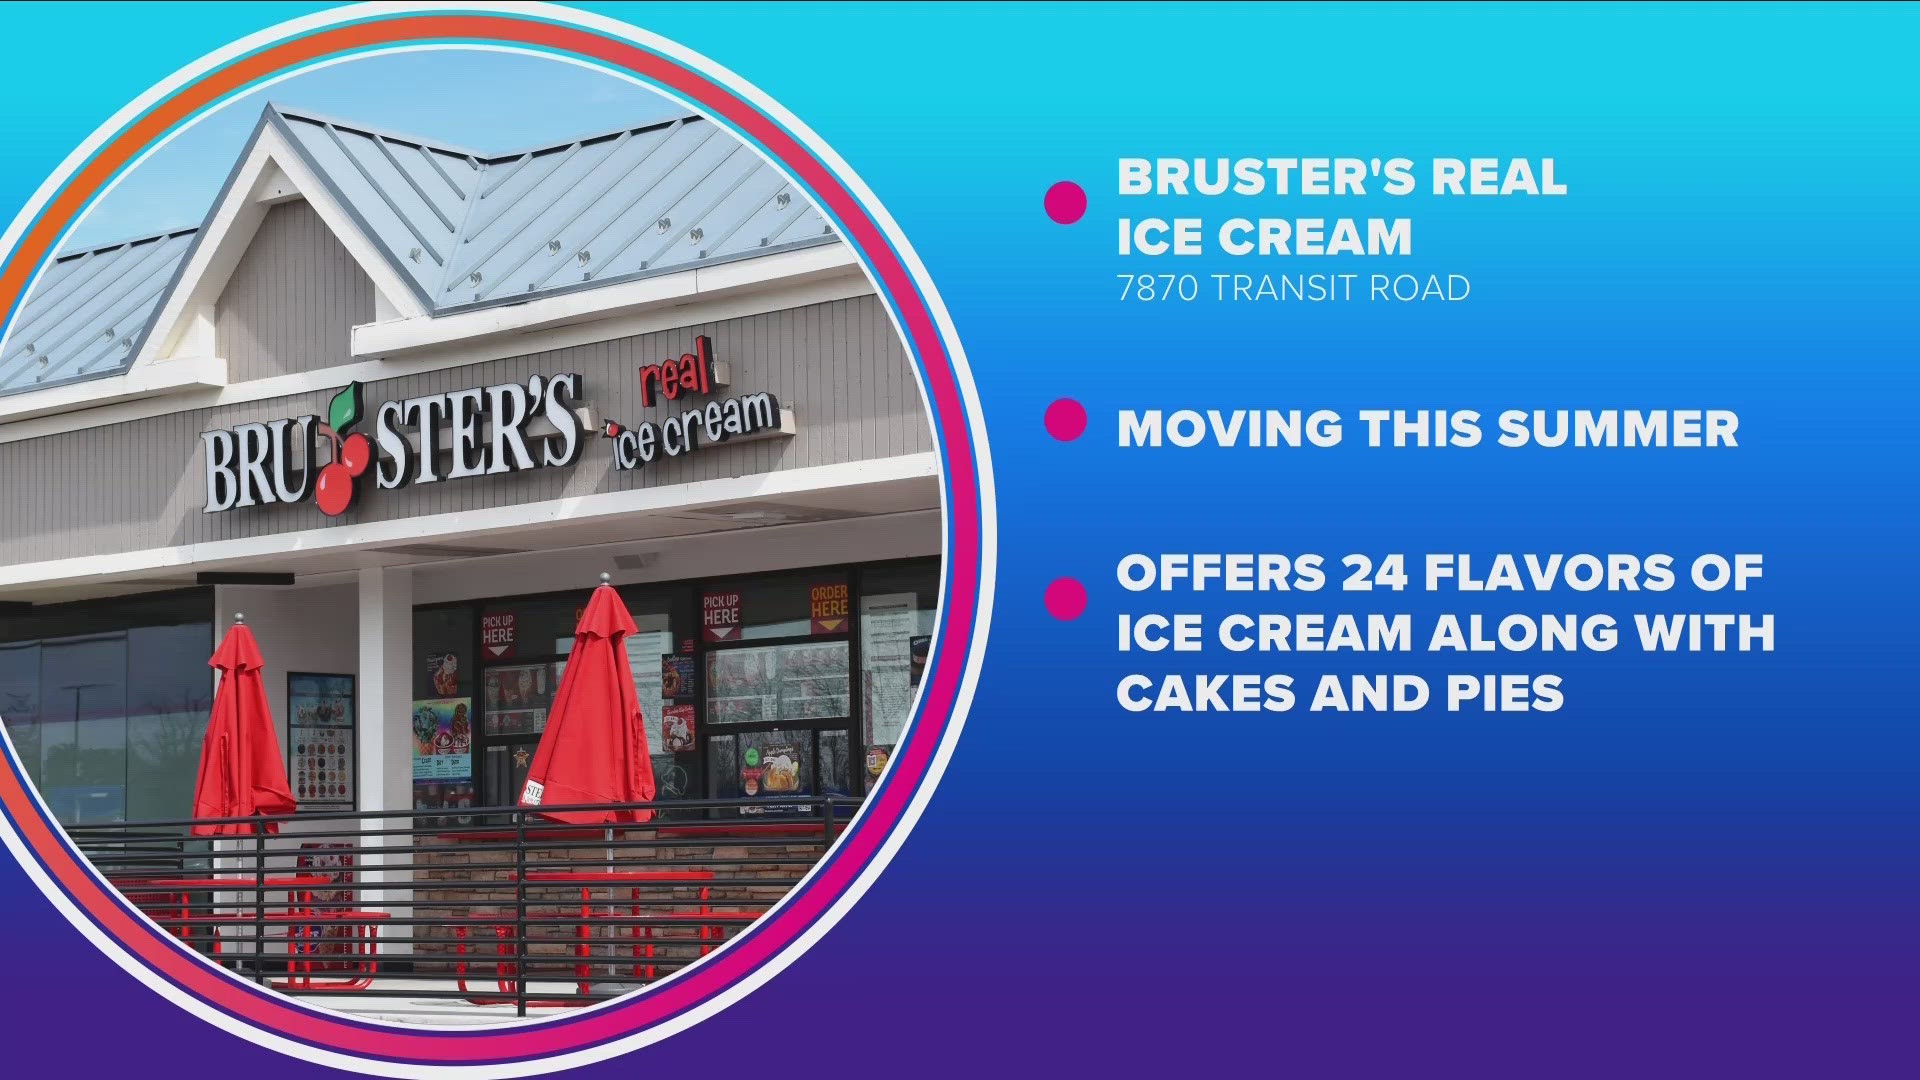 Bruster's Real ice Cream is coming to 78-70 Transit Road this summer